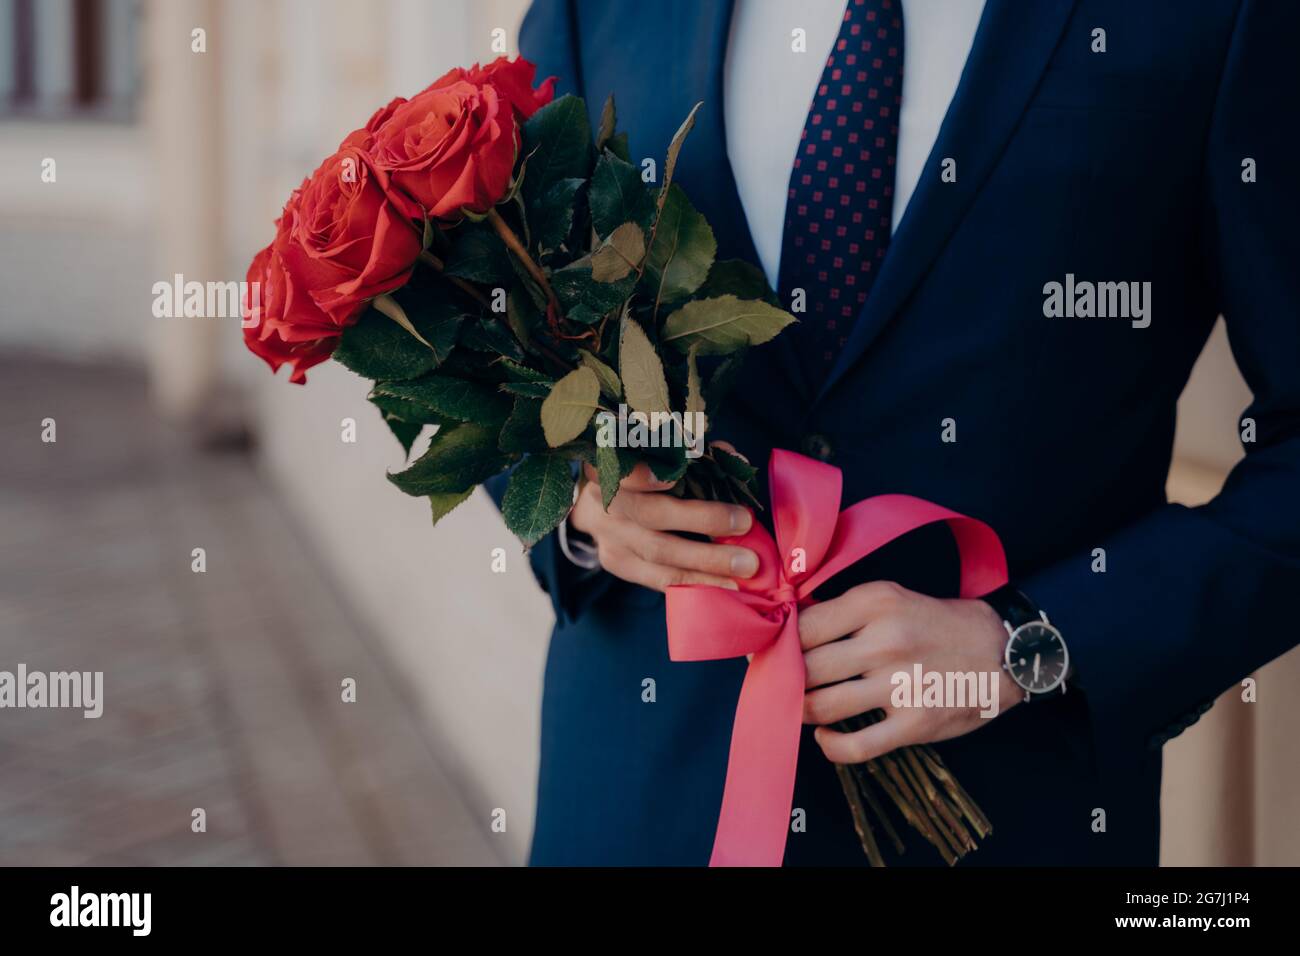 Man dressed in blue suit holding bouquet of red roses Stock Photo